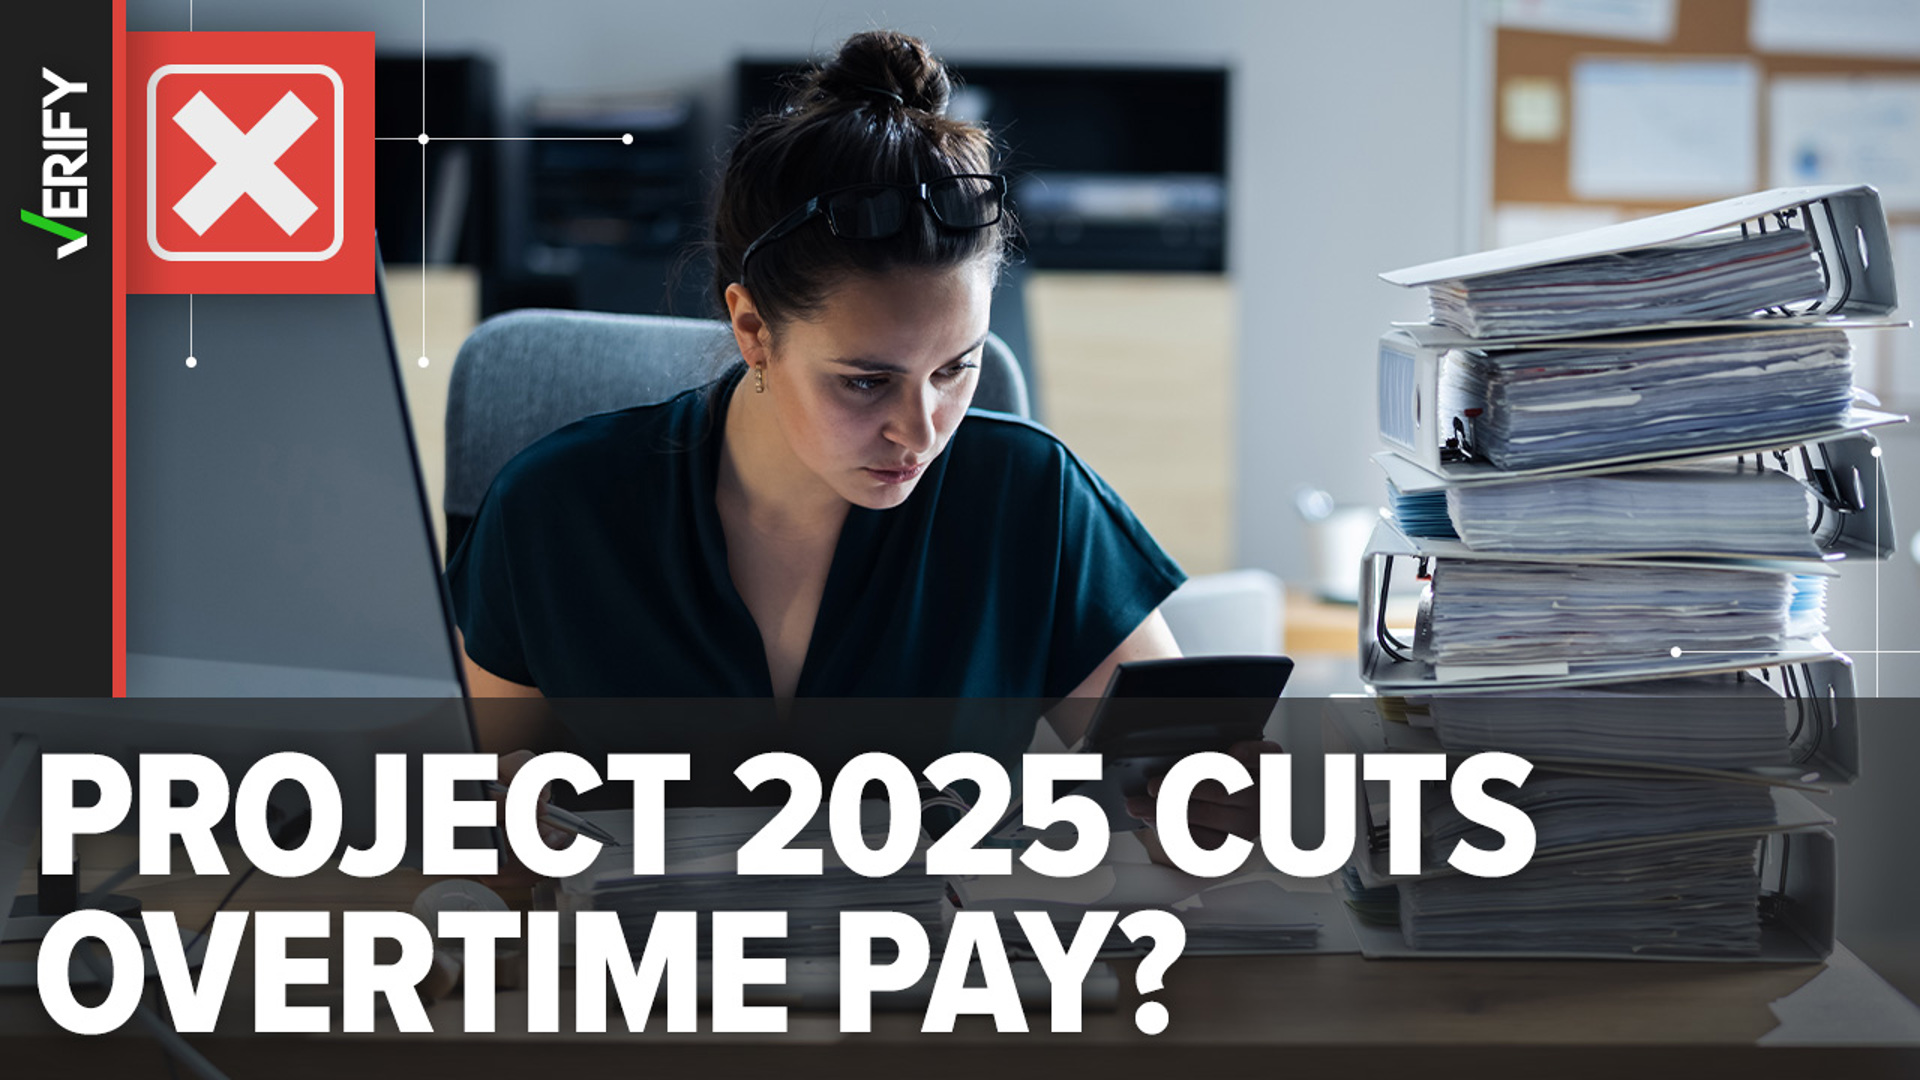 Project 2025 recommends overtime pay adjustments and calls on Congress to amend federal overtime rules, but it doesn’t advocate for the elimination of overtime pay.